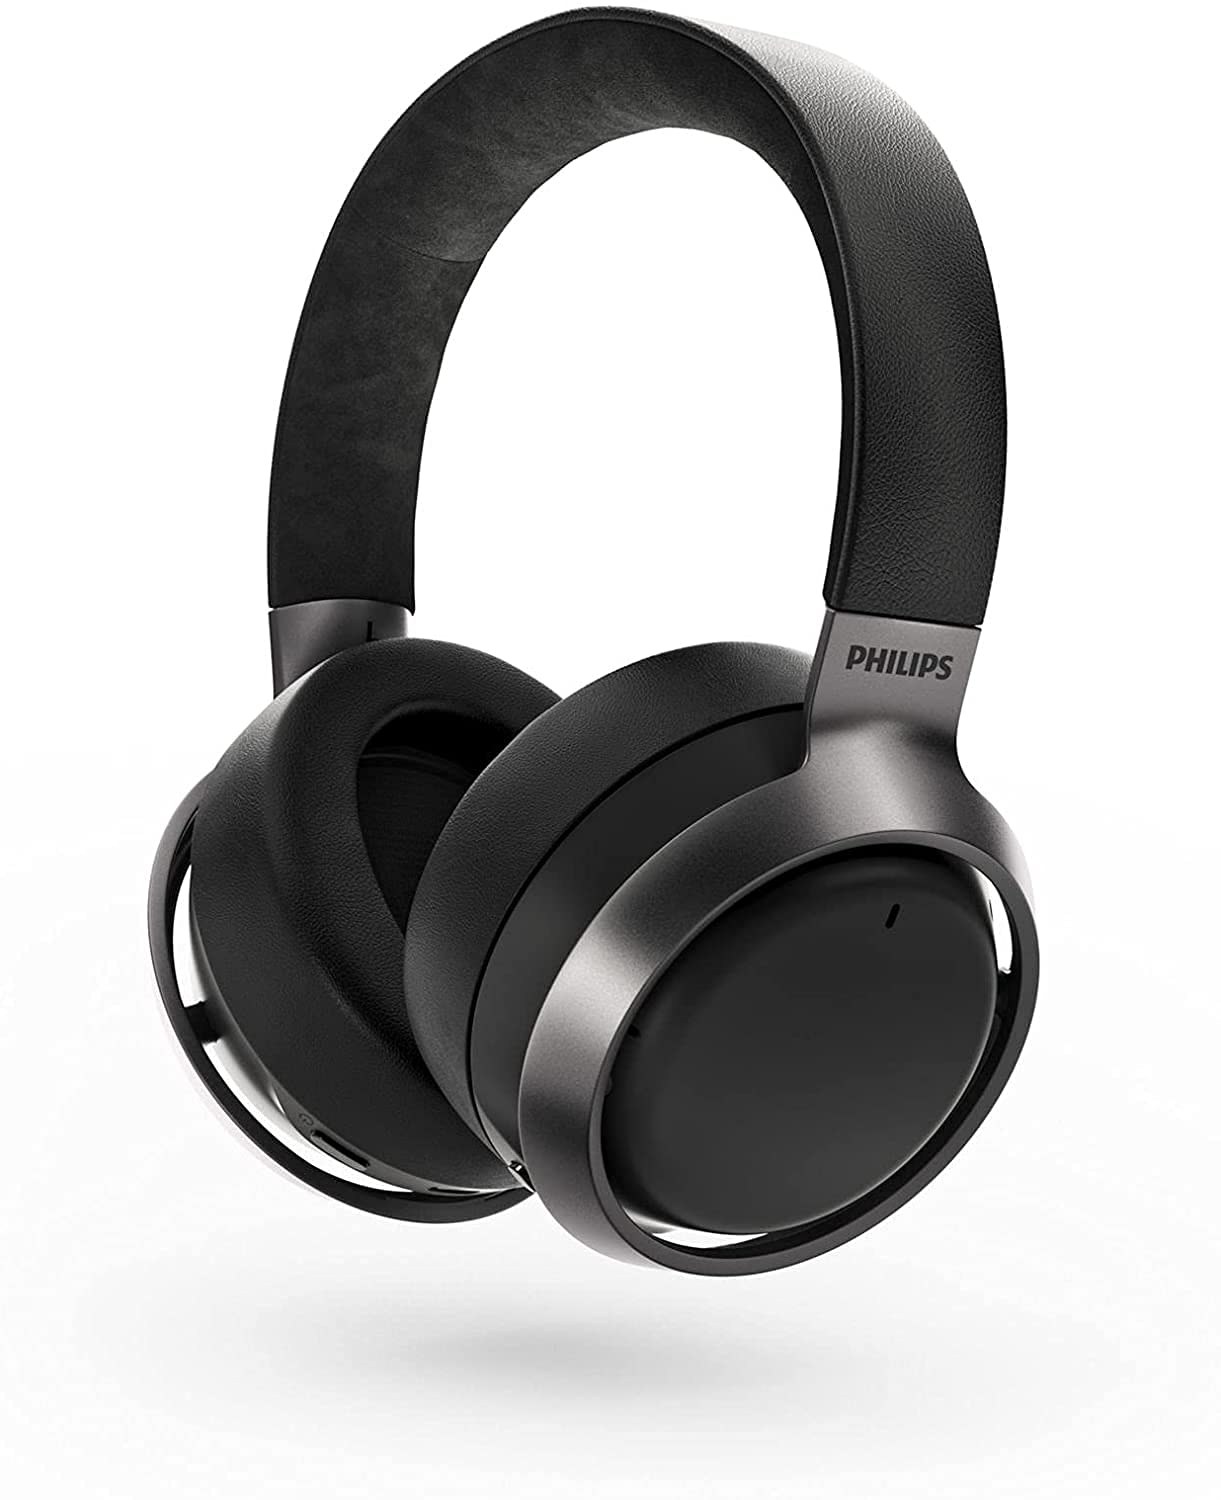 Philips Audio Philips Fidelio L3 Flagship Over-Ear Wireless Headphones with Active Noise Cancellation Pro+ (ANC) and Bluetooth Multipoint Connection